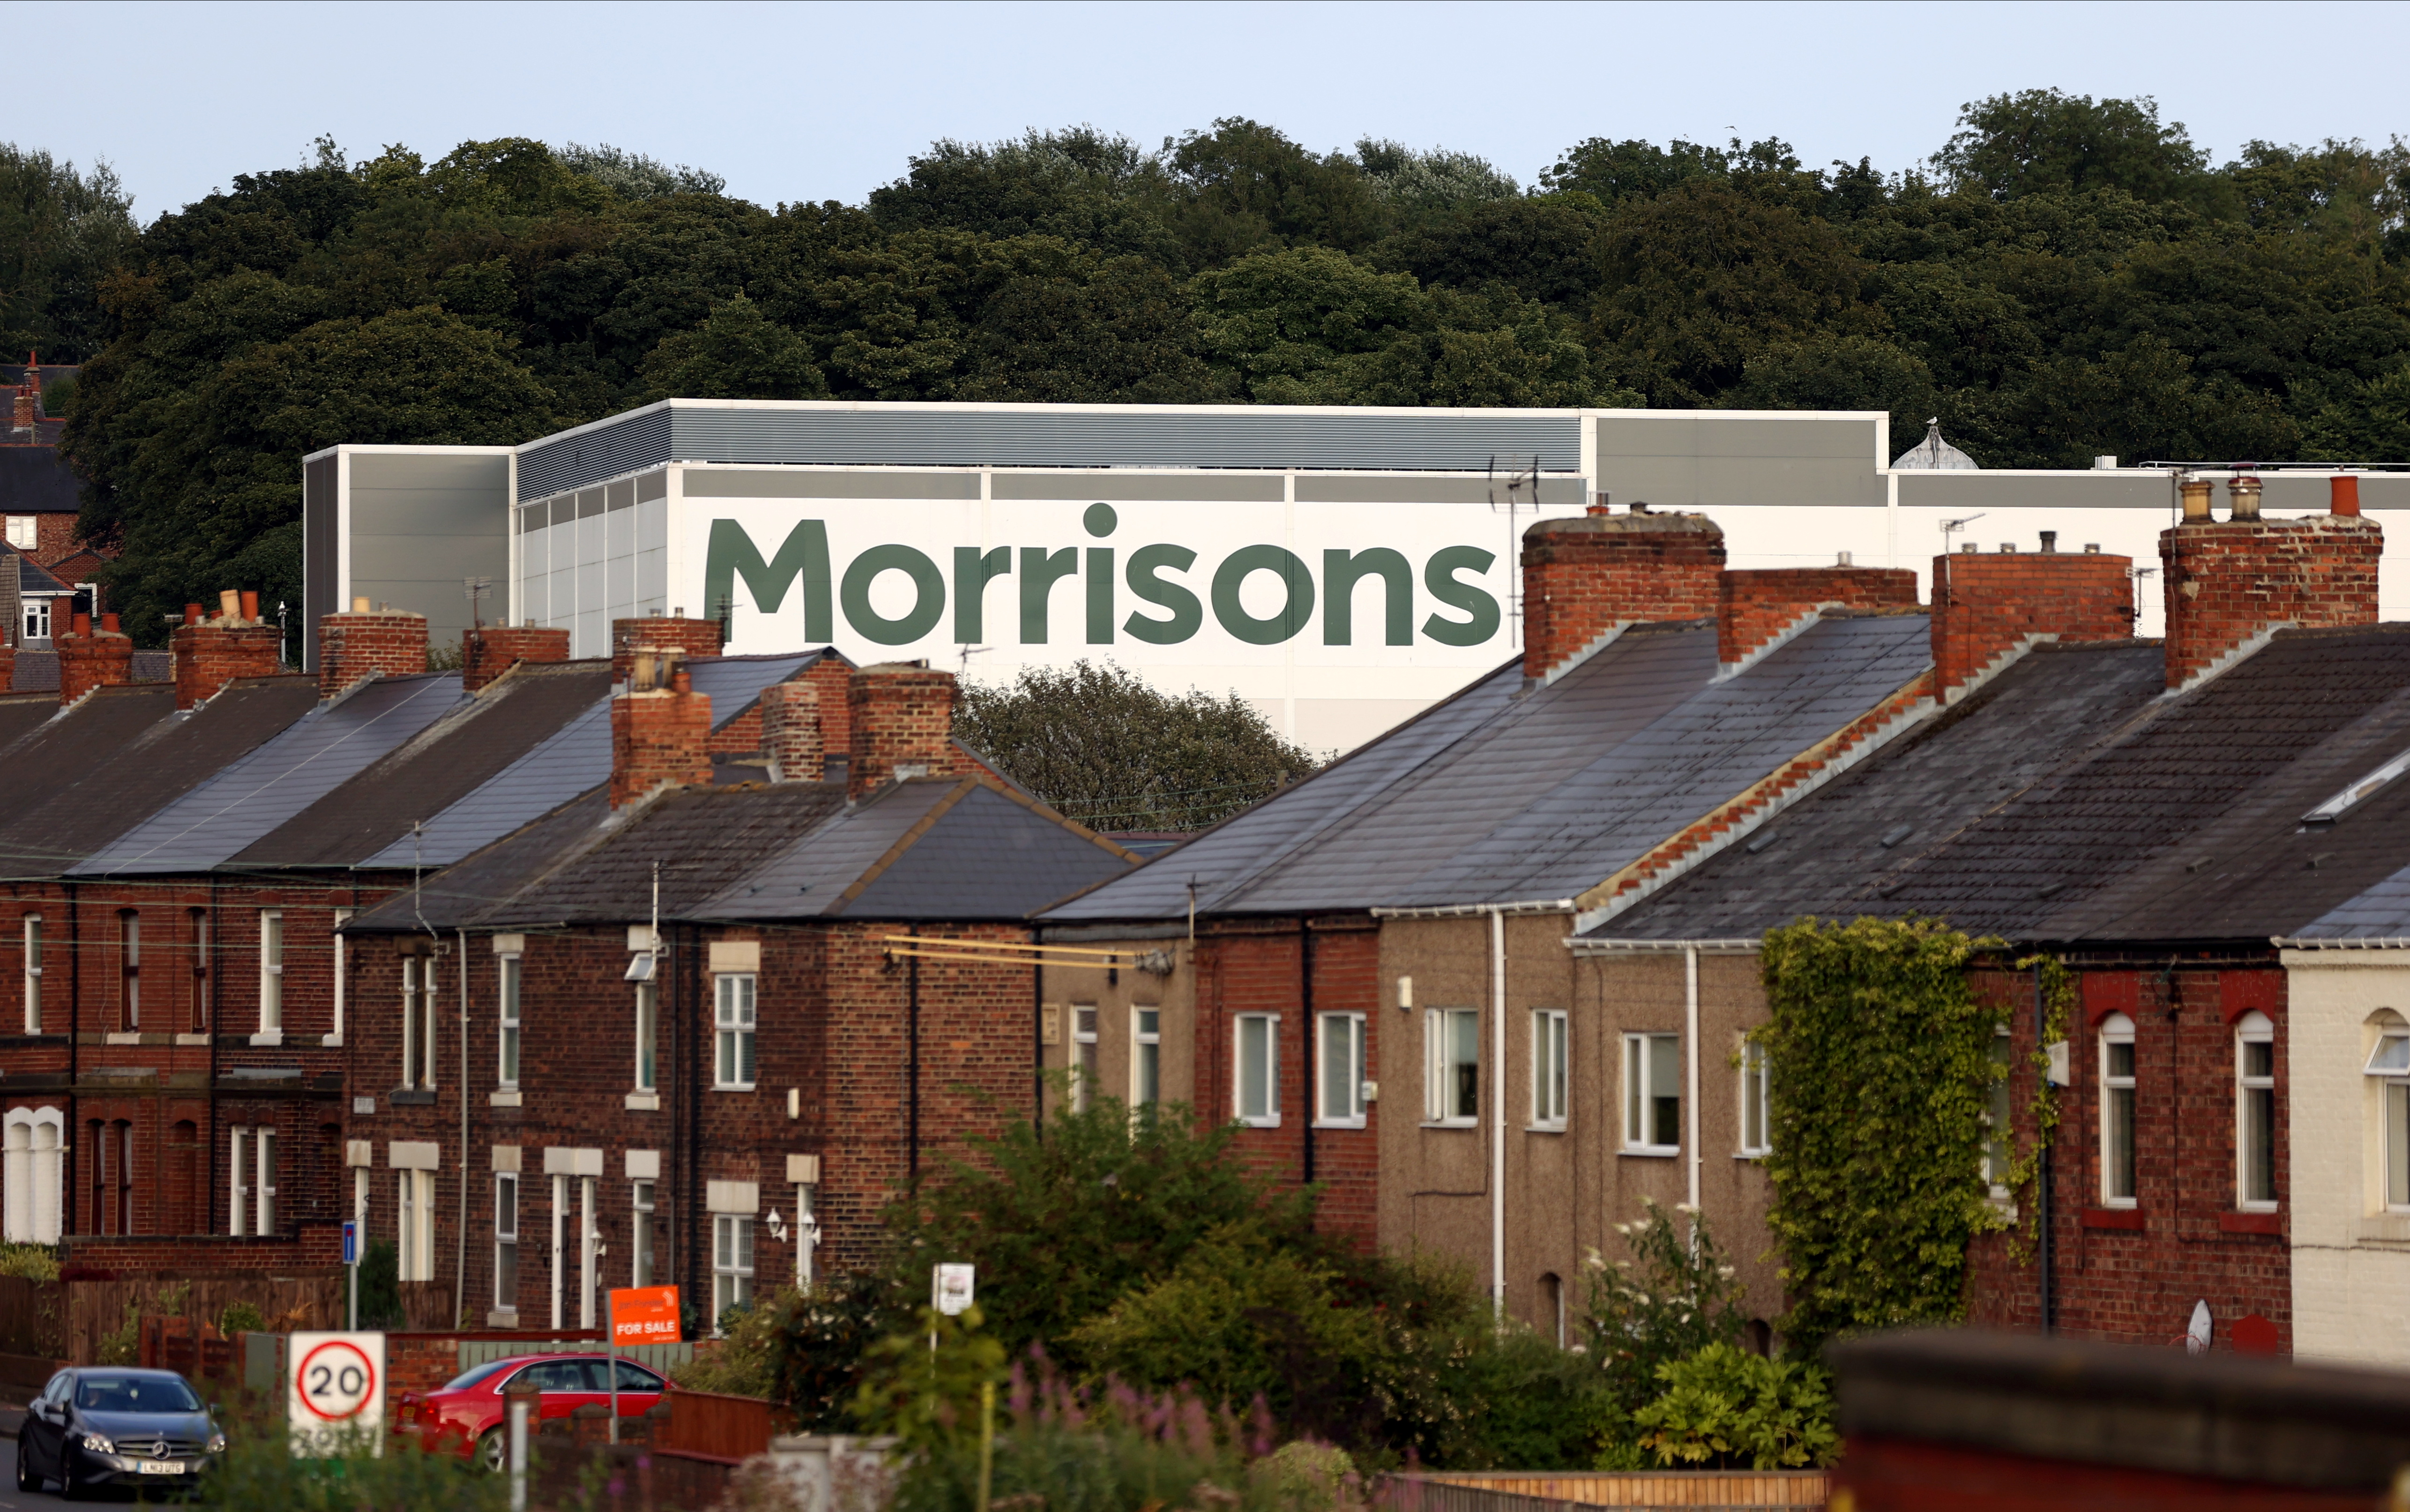 A view of a Morrisons supermarket in Birtley